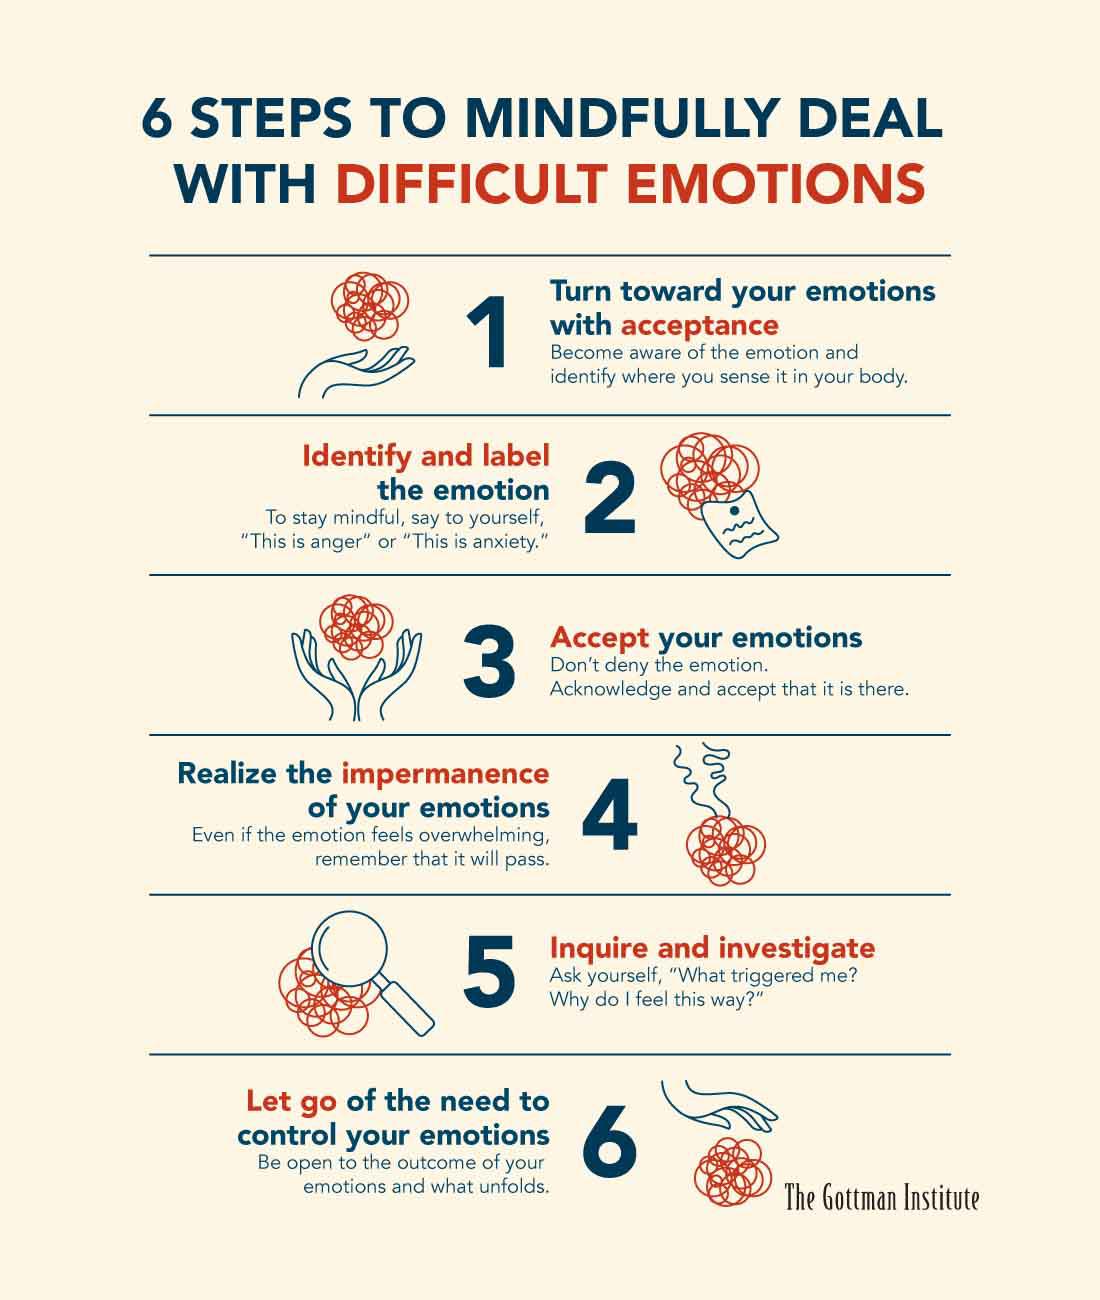 How to deal with difficult emotions